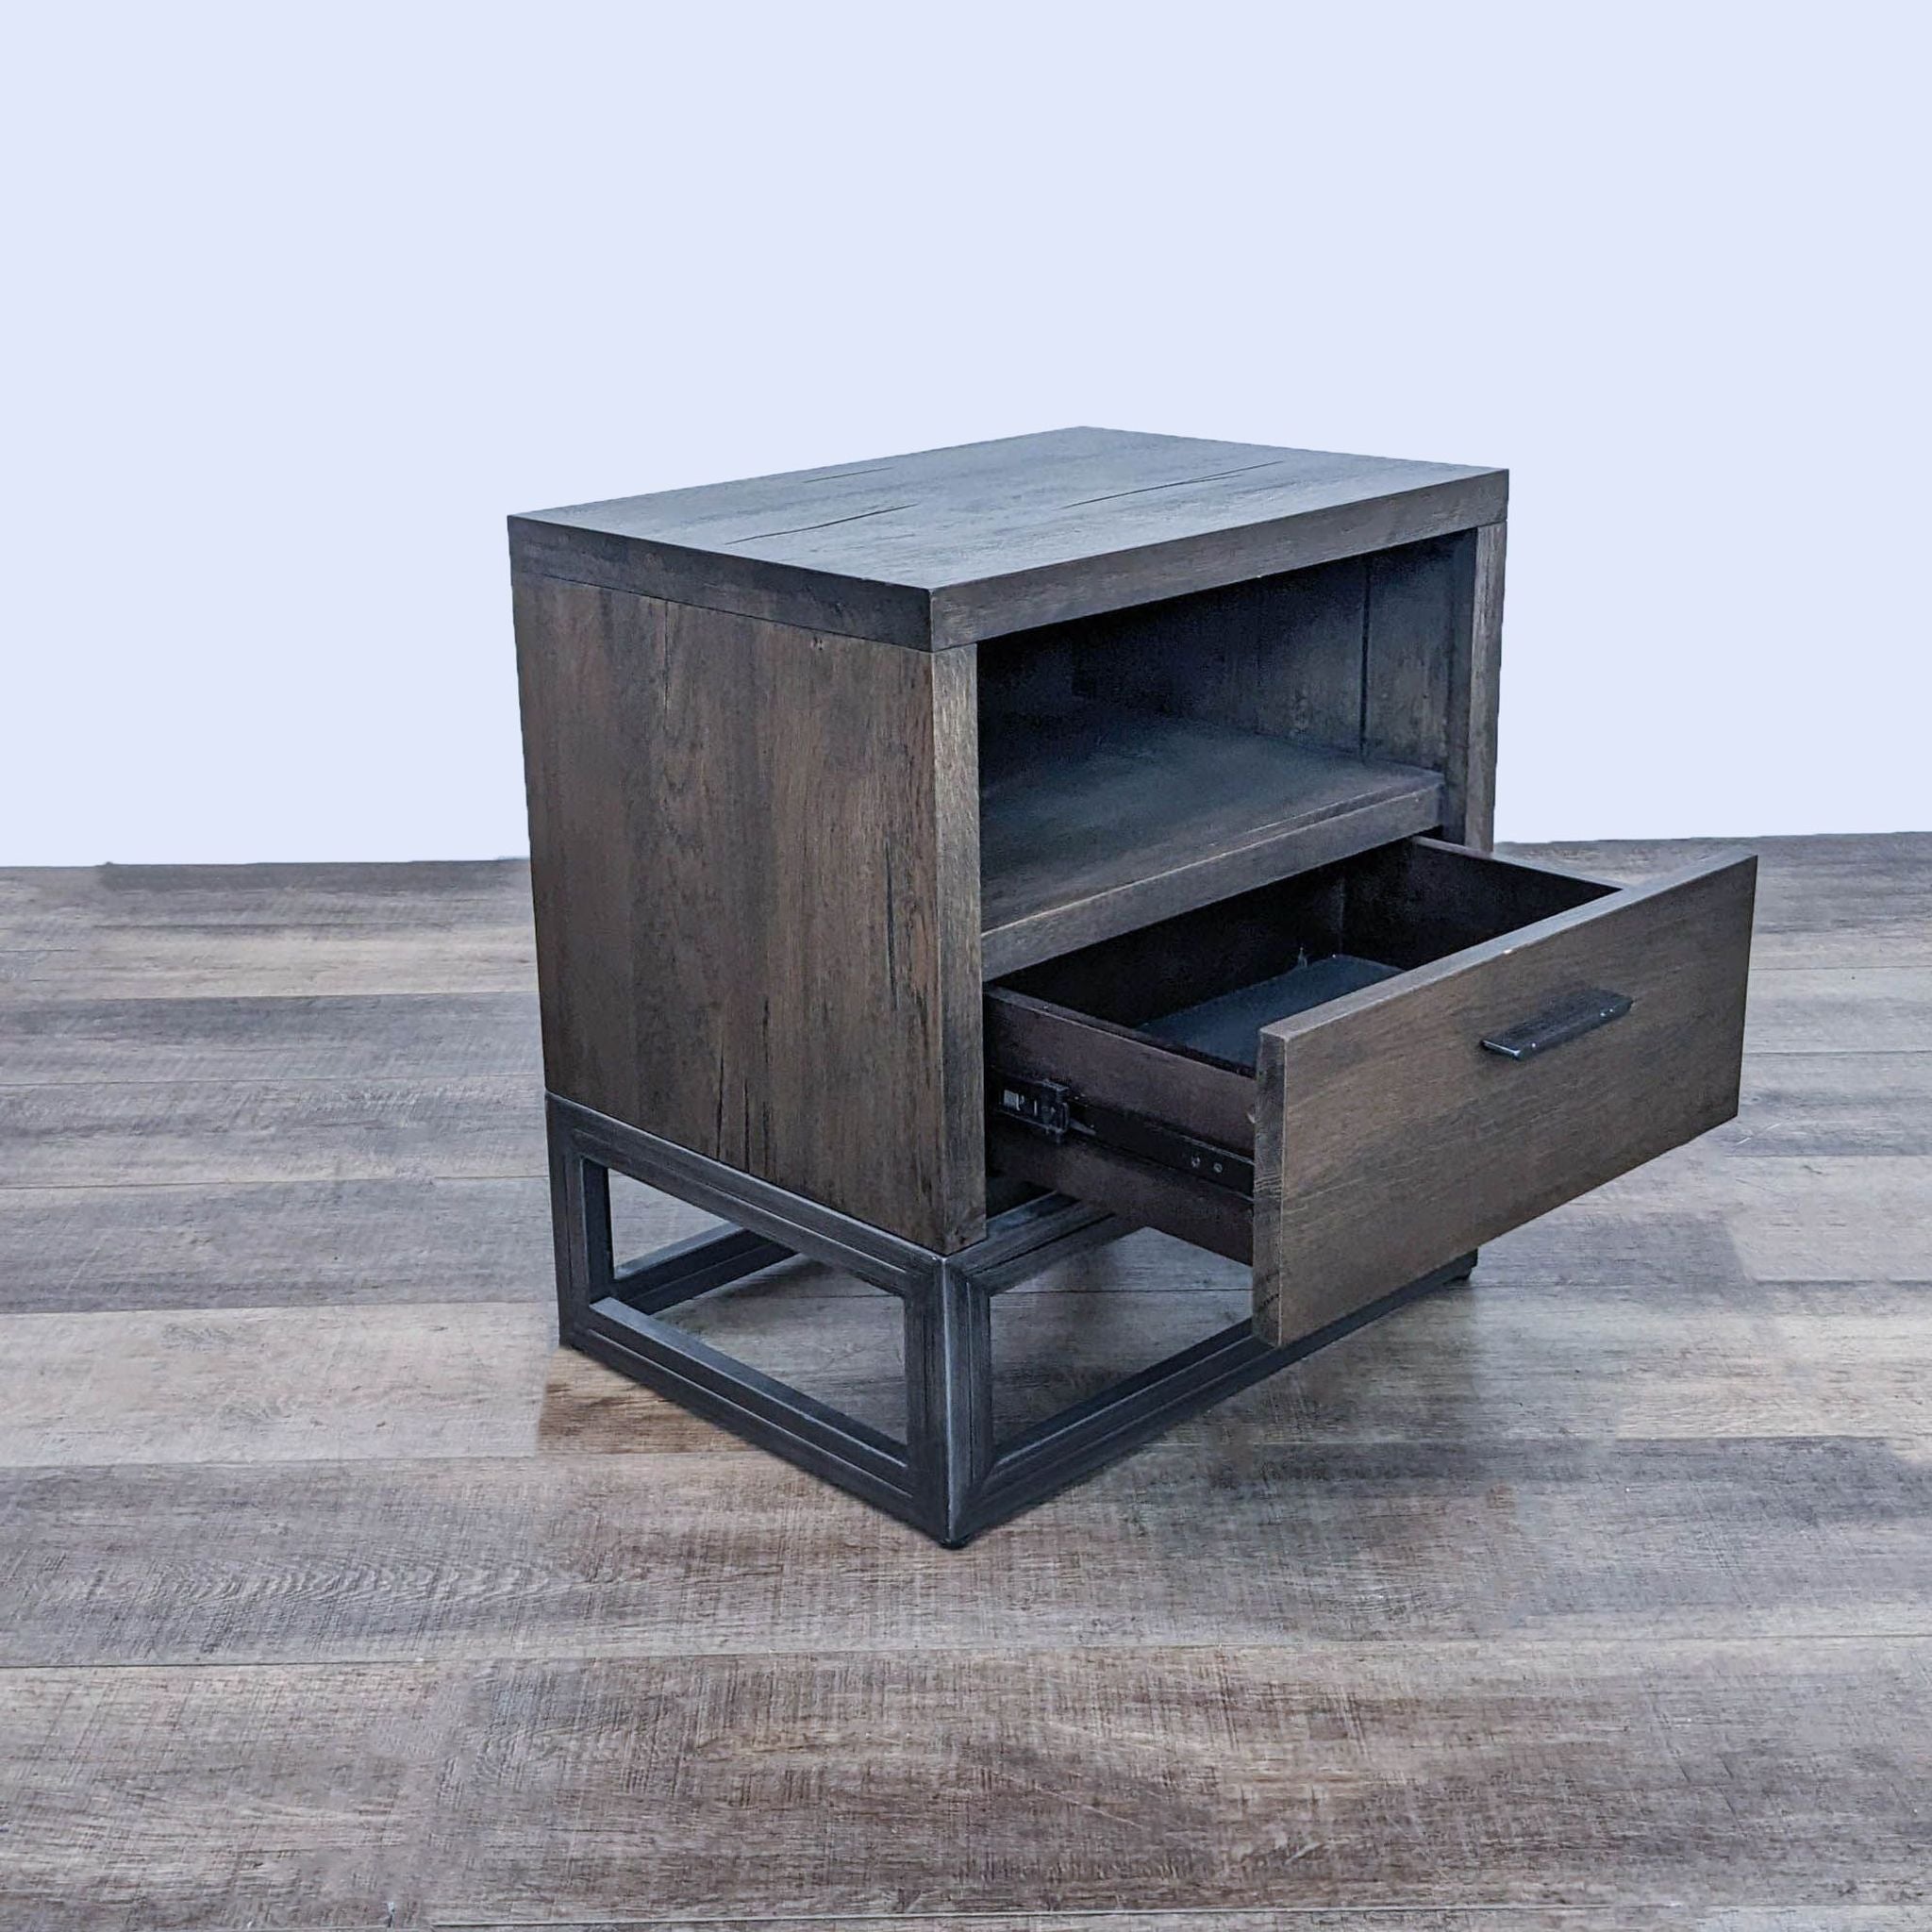 End table by Reperch featuring a metal frame, with a drawer partially open revealing interior space.